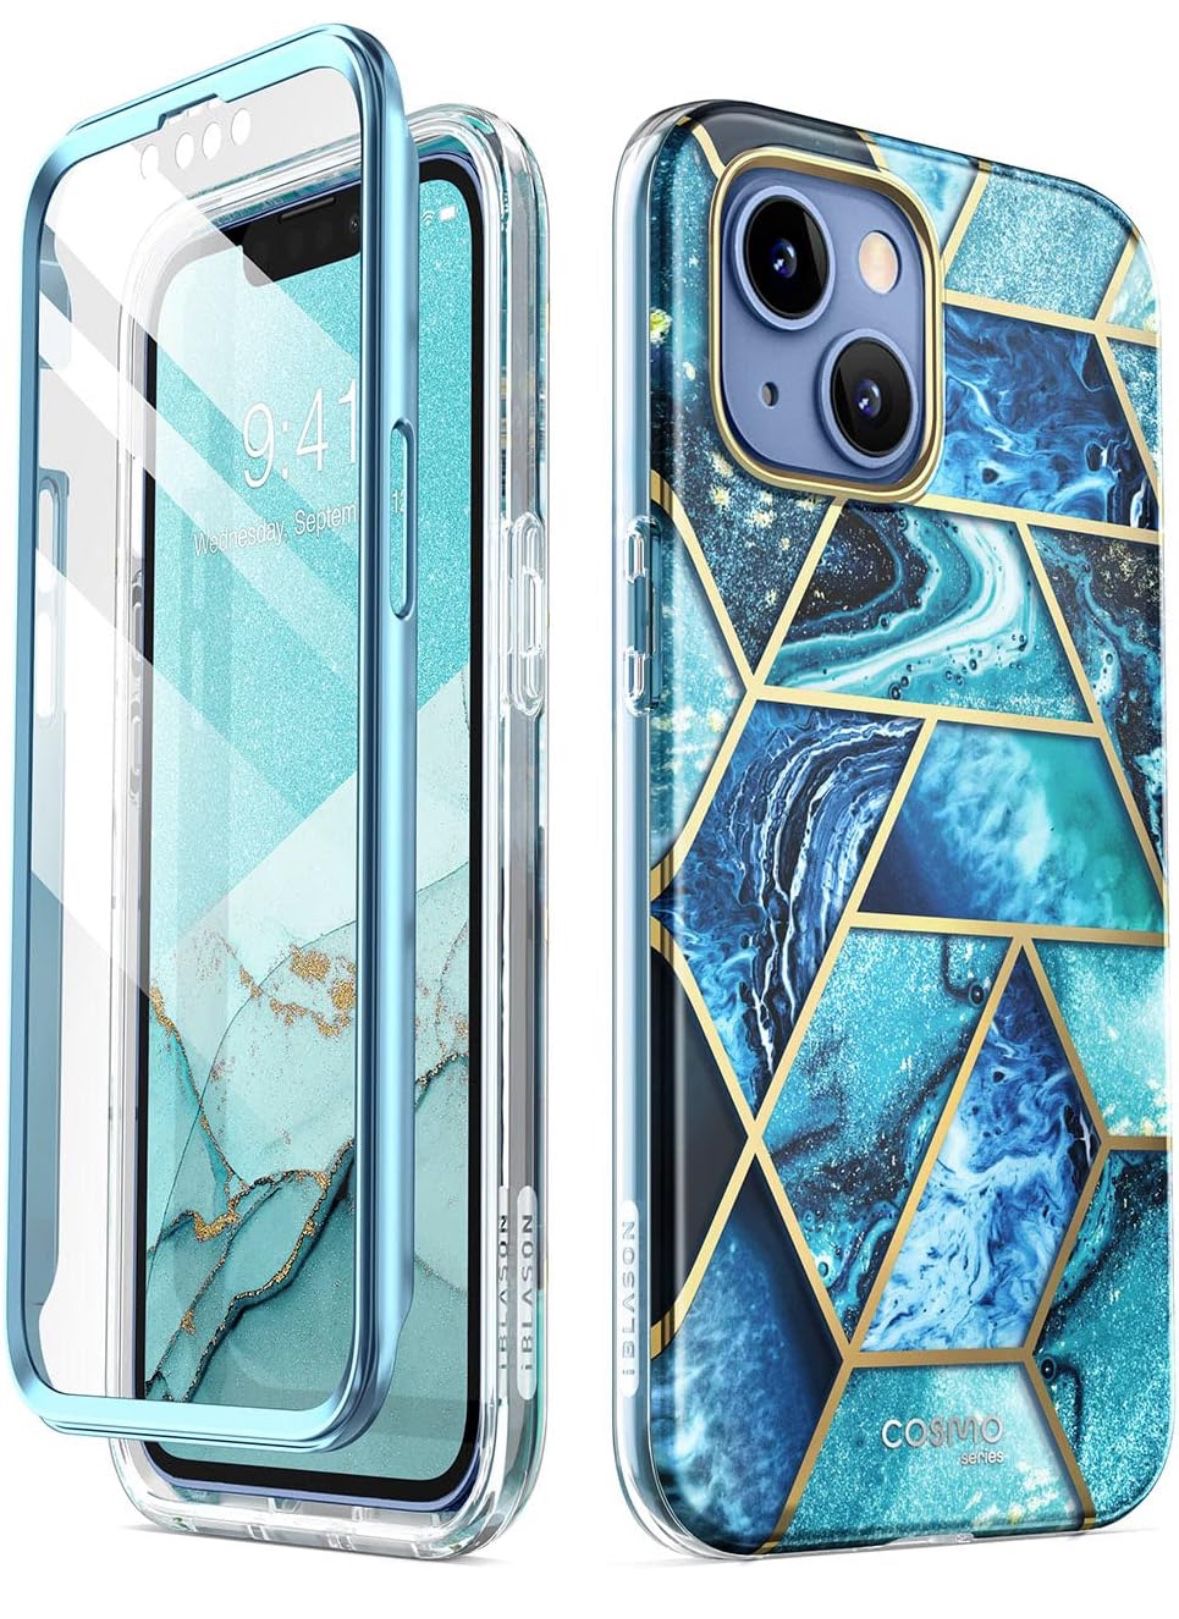 iPhone 13/14 Case 6.1 inch (2021/2022) Slim Full-Body Case with built in Screen Protector (Ocean)